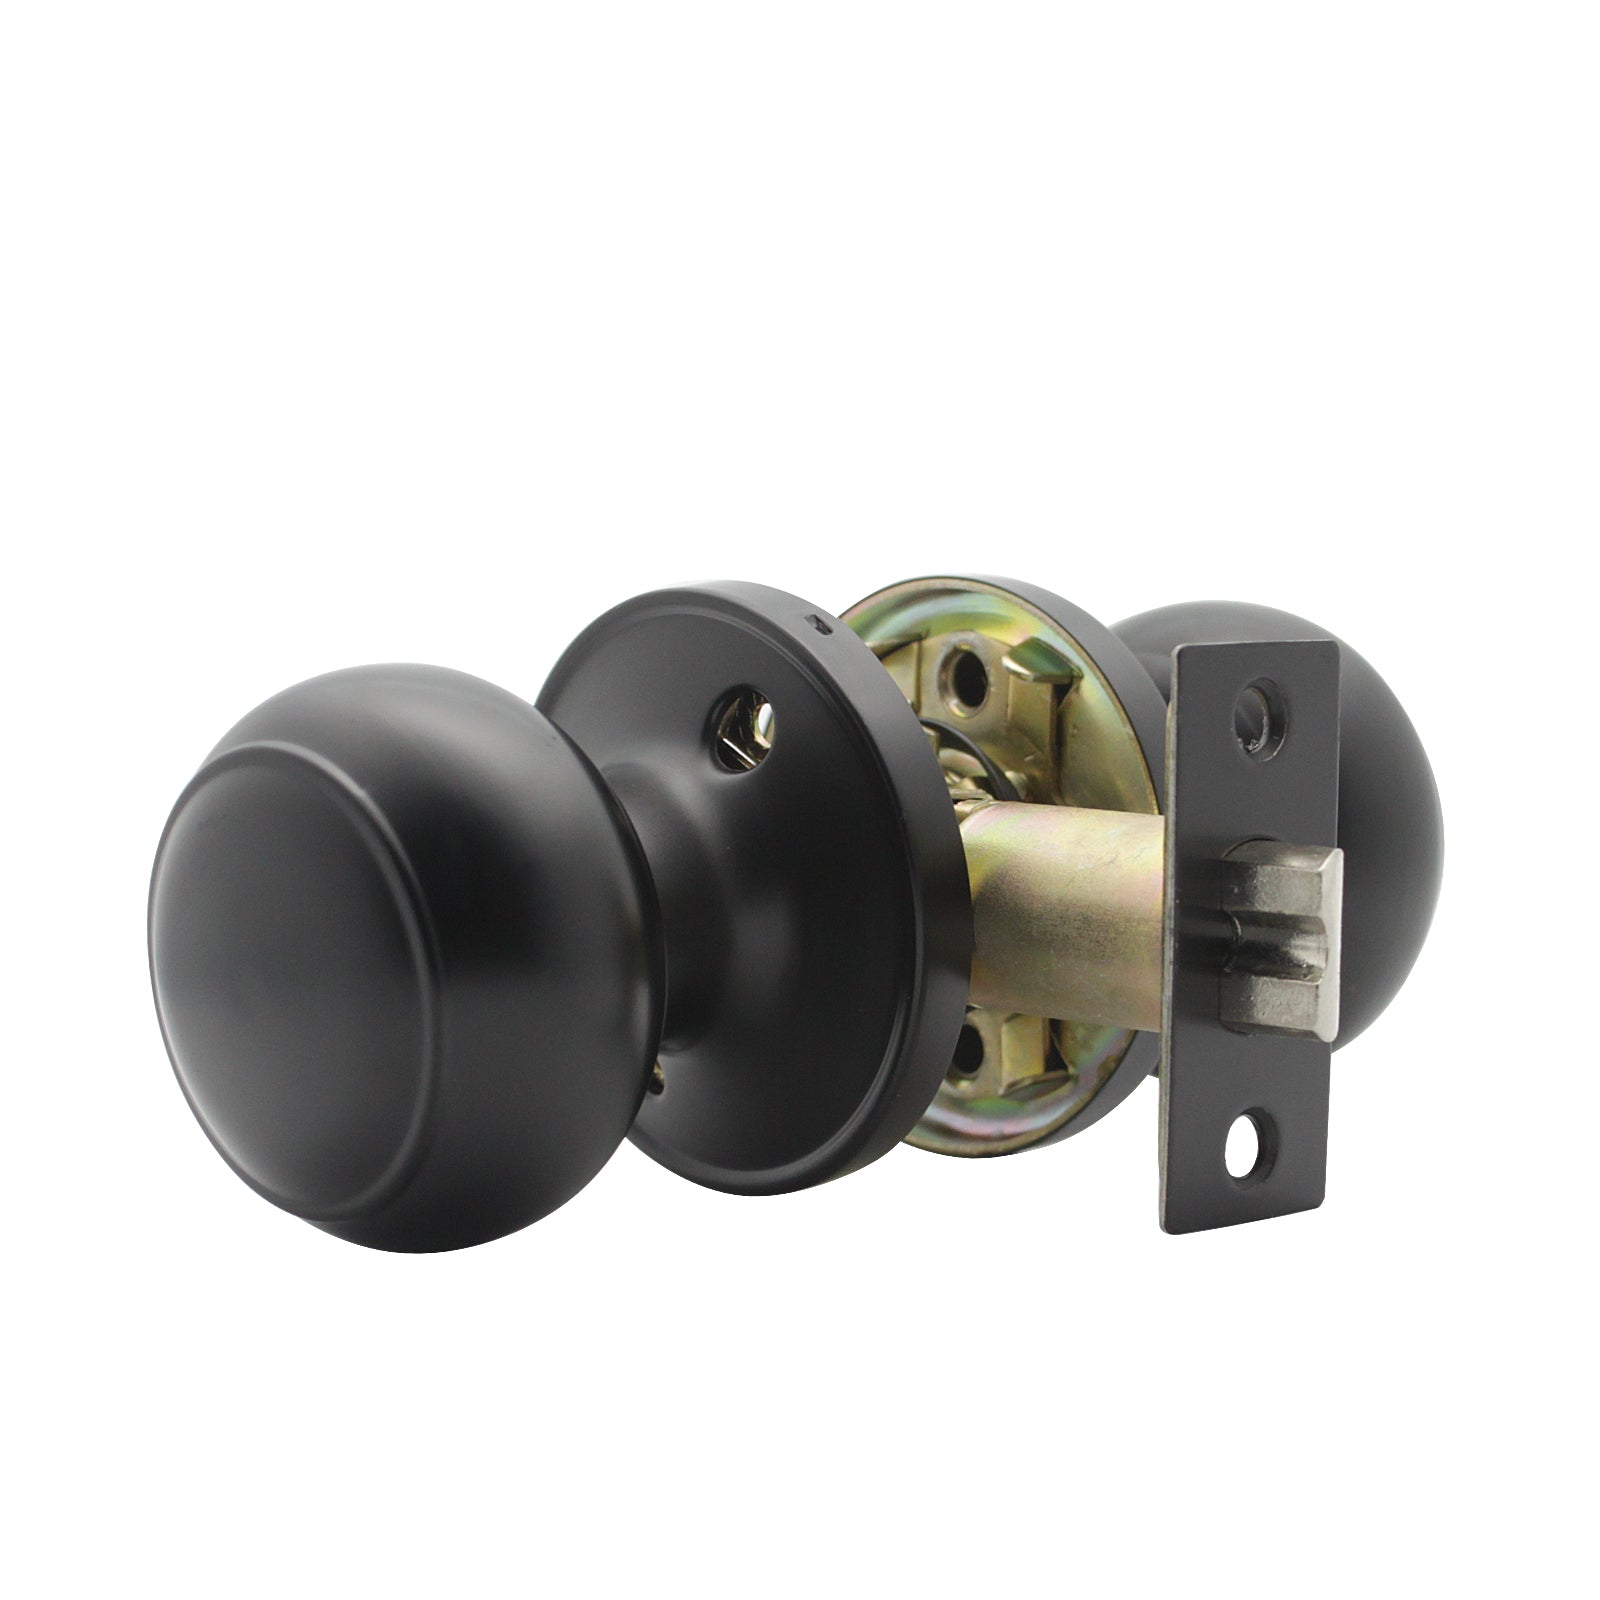 Flat Ball Passage Door Knobs for Closet and Hallway, Black Finish DL609BKPS